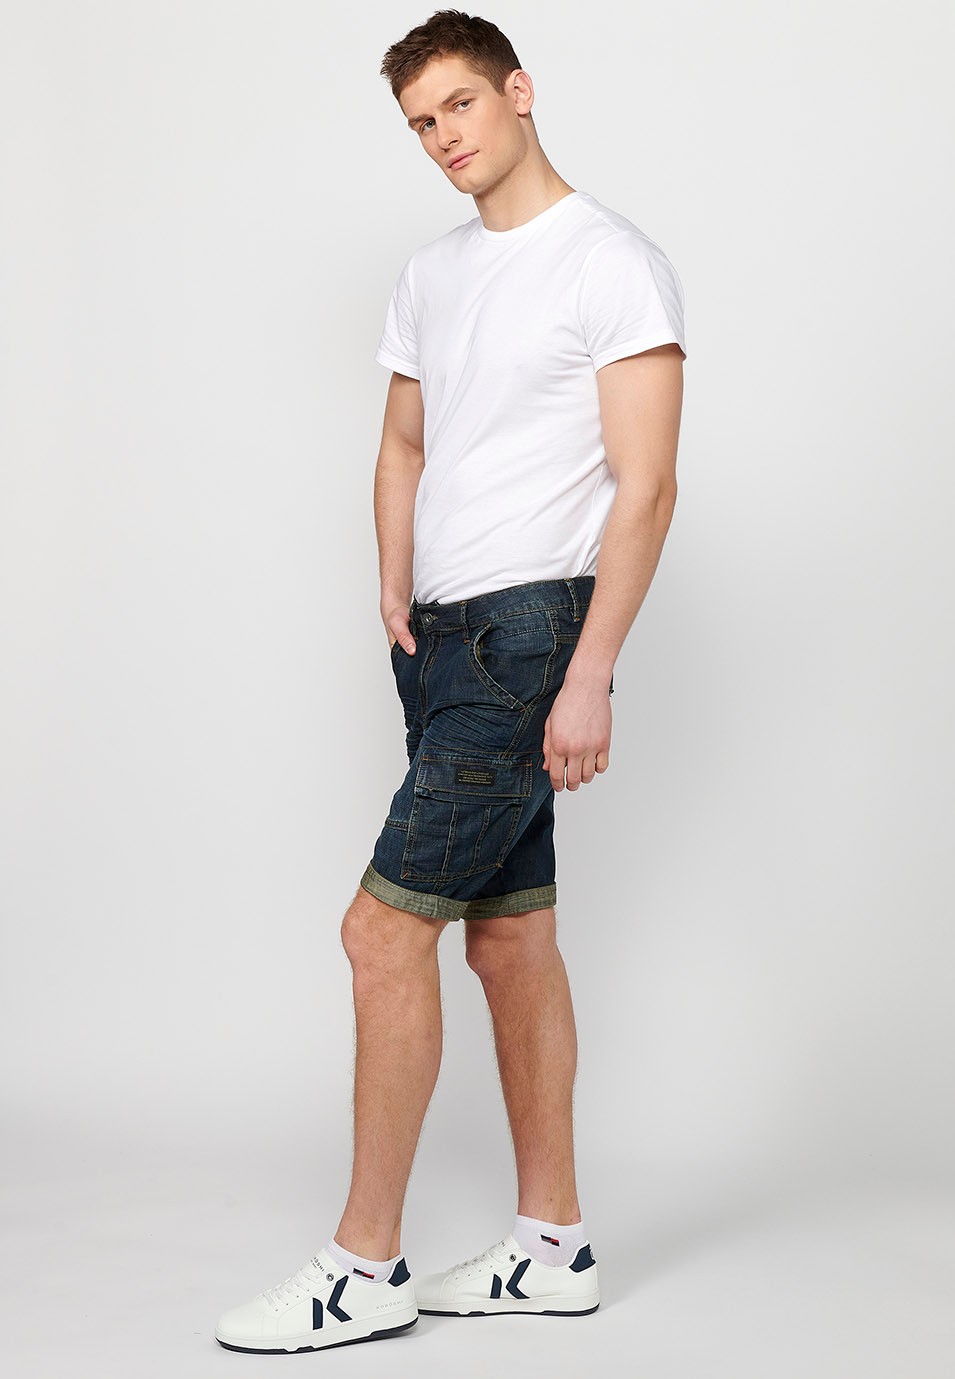 Blue Denim Bermuda Shorts with Side Cargo Pockets and Front Closure with Zipper and Button for Men